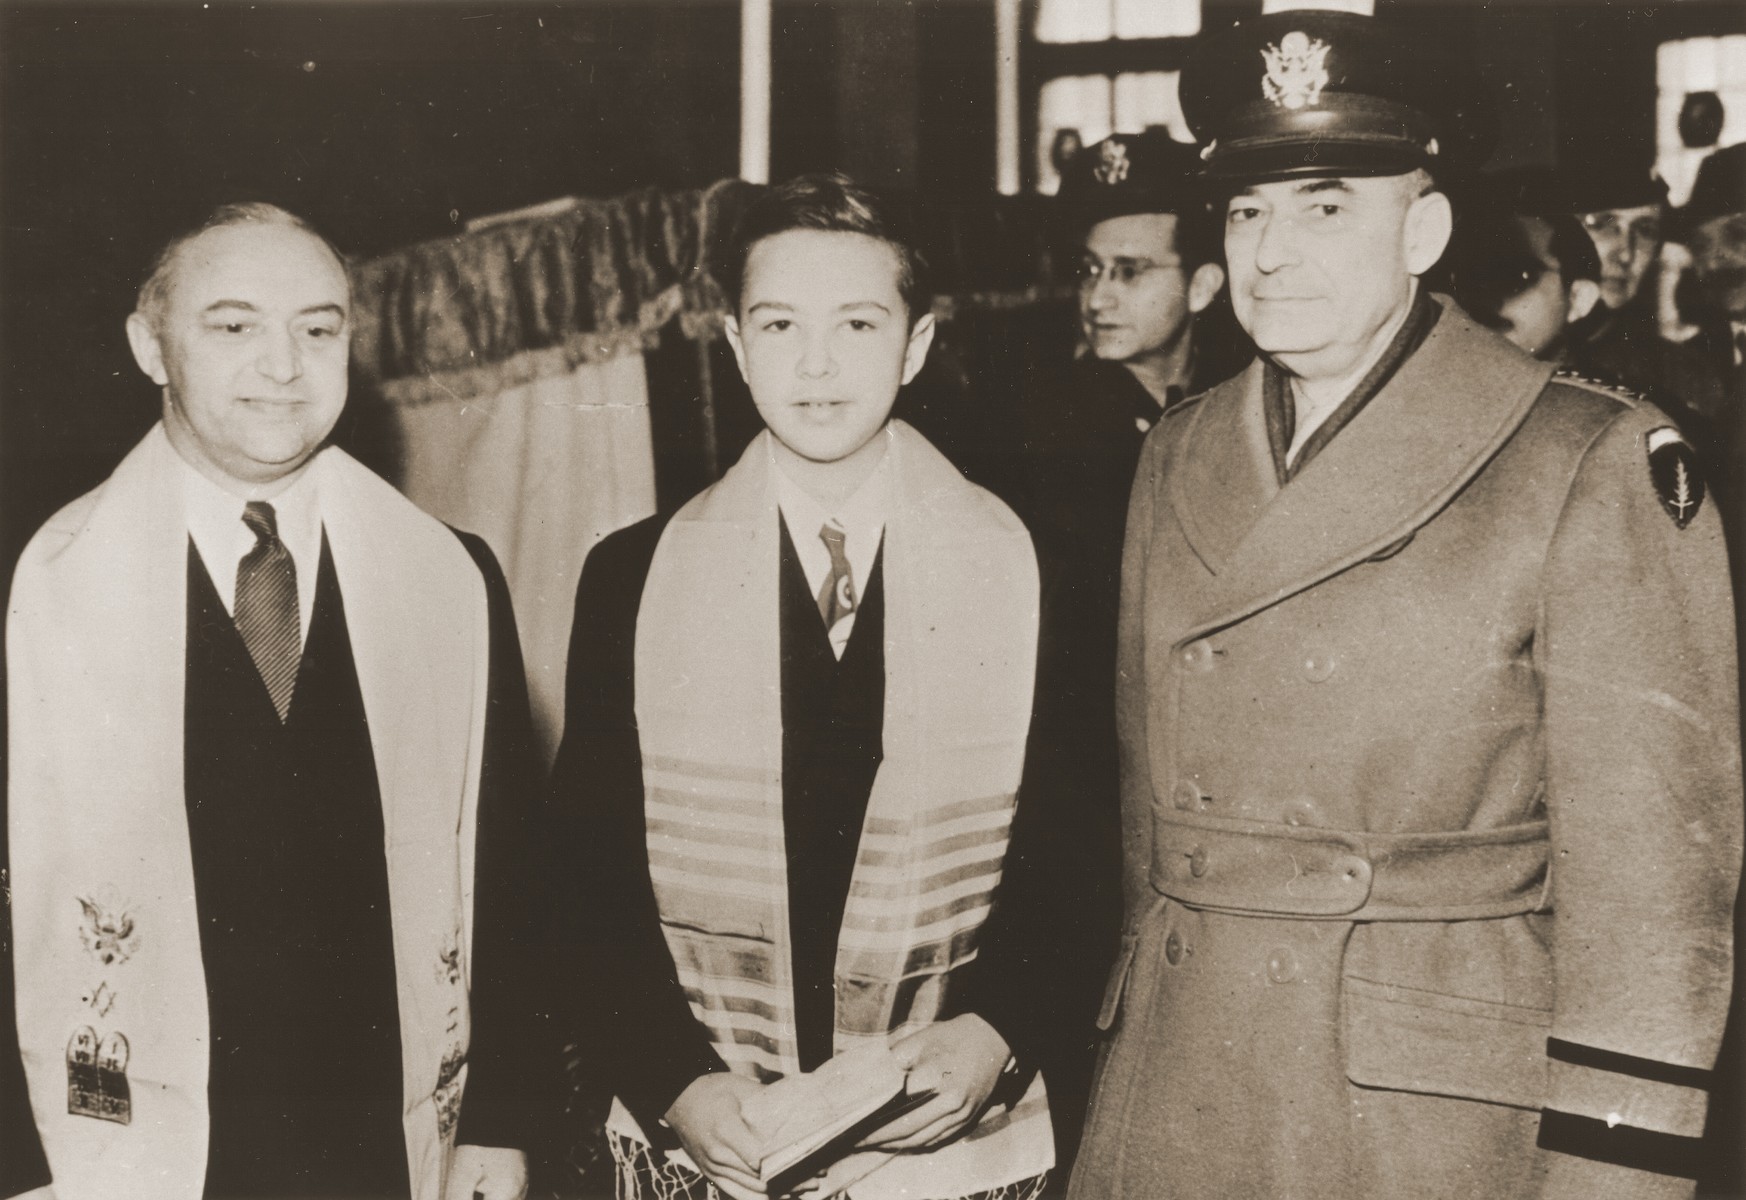 Stephen Bernstein poses with his father, Philip Bernstein (left), adviser on Jewish affairs to the U.S. Army commander in Europe, and General Joseph McNarney, during his bar mitzvah at the Philanthropin School in Frankfurt.